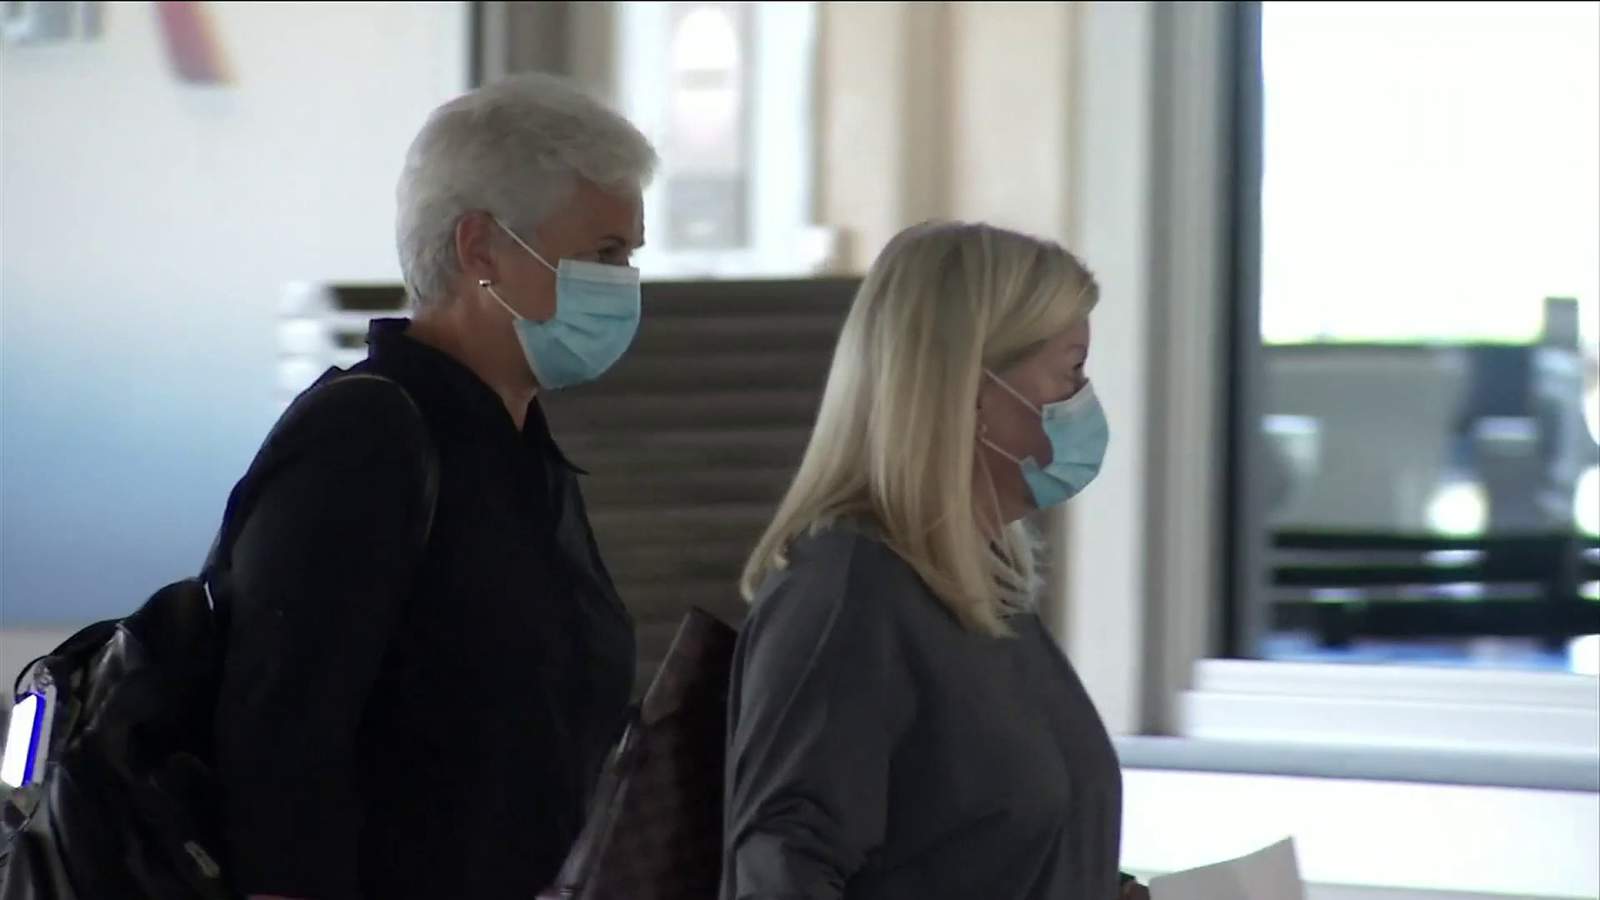 Major airlines now requiring face masks to fly